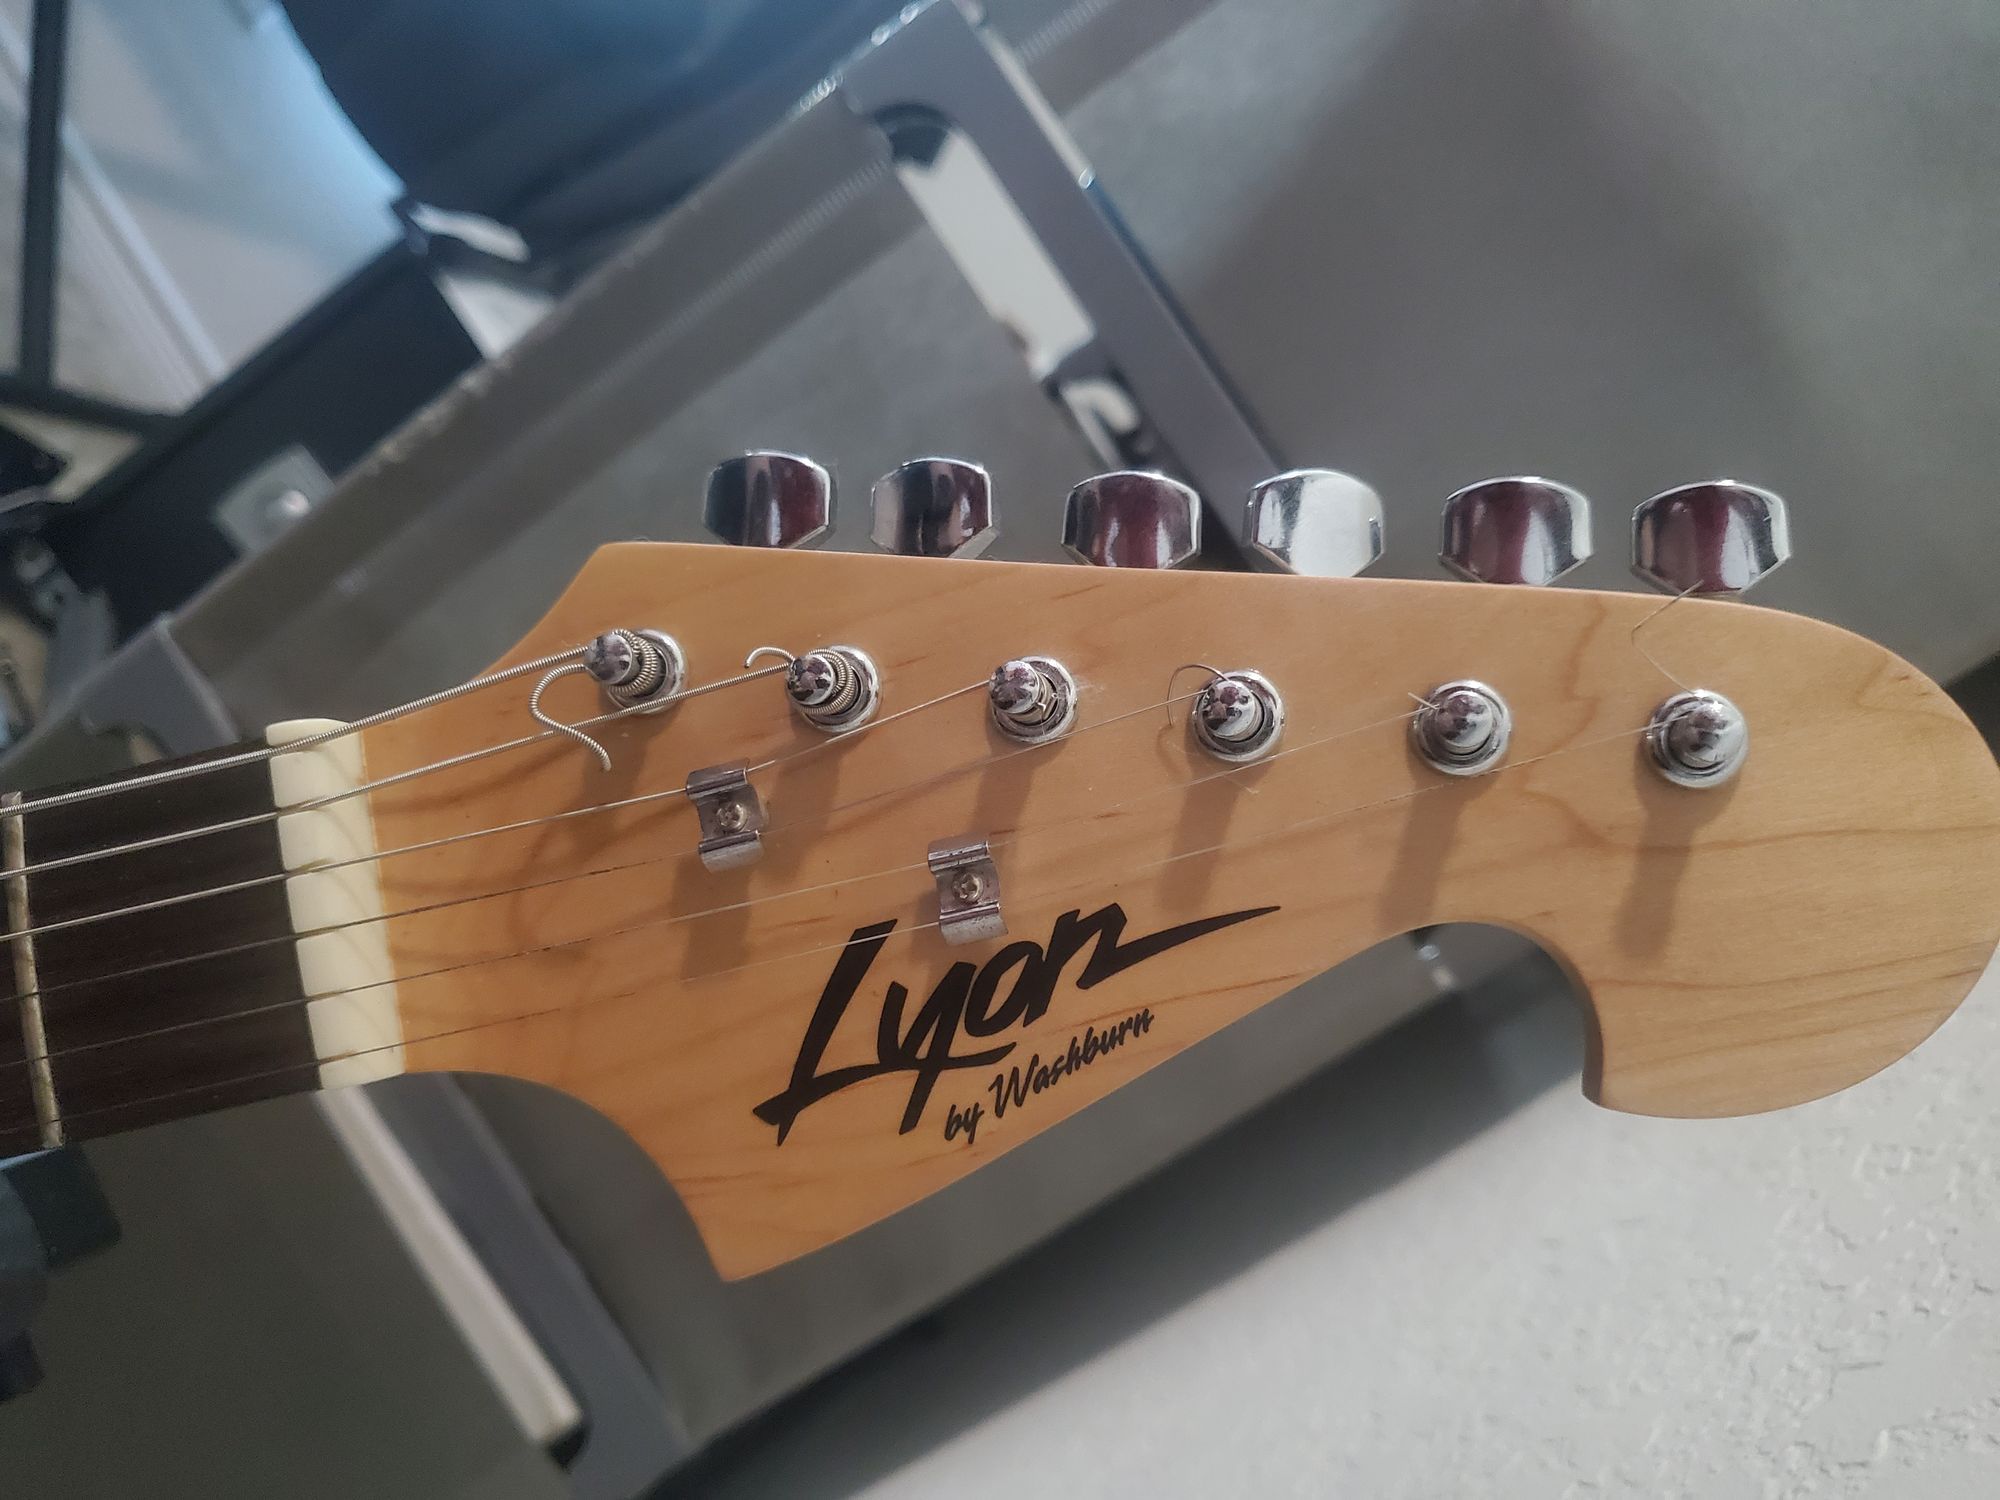 Headstock of Lyon by Washburn electric Strat style guitar